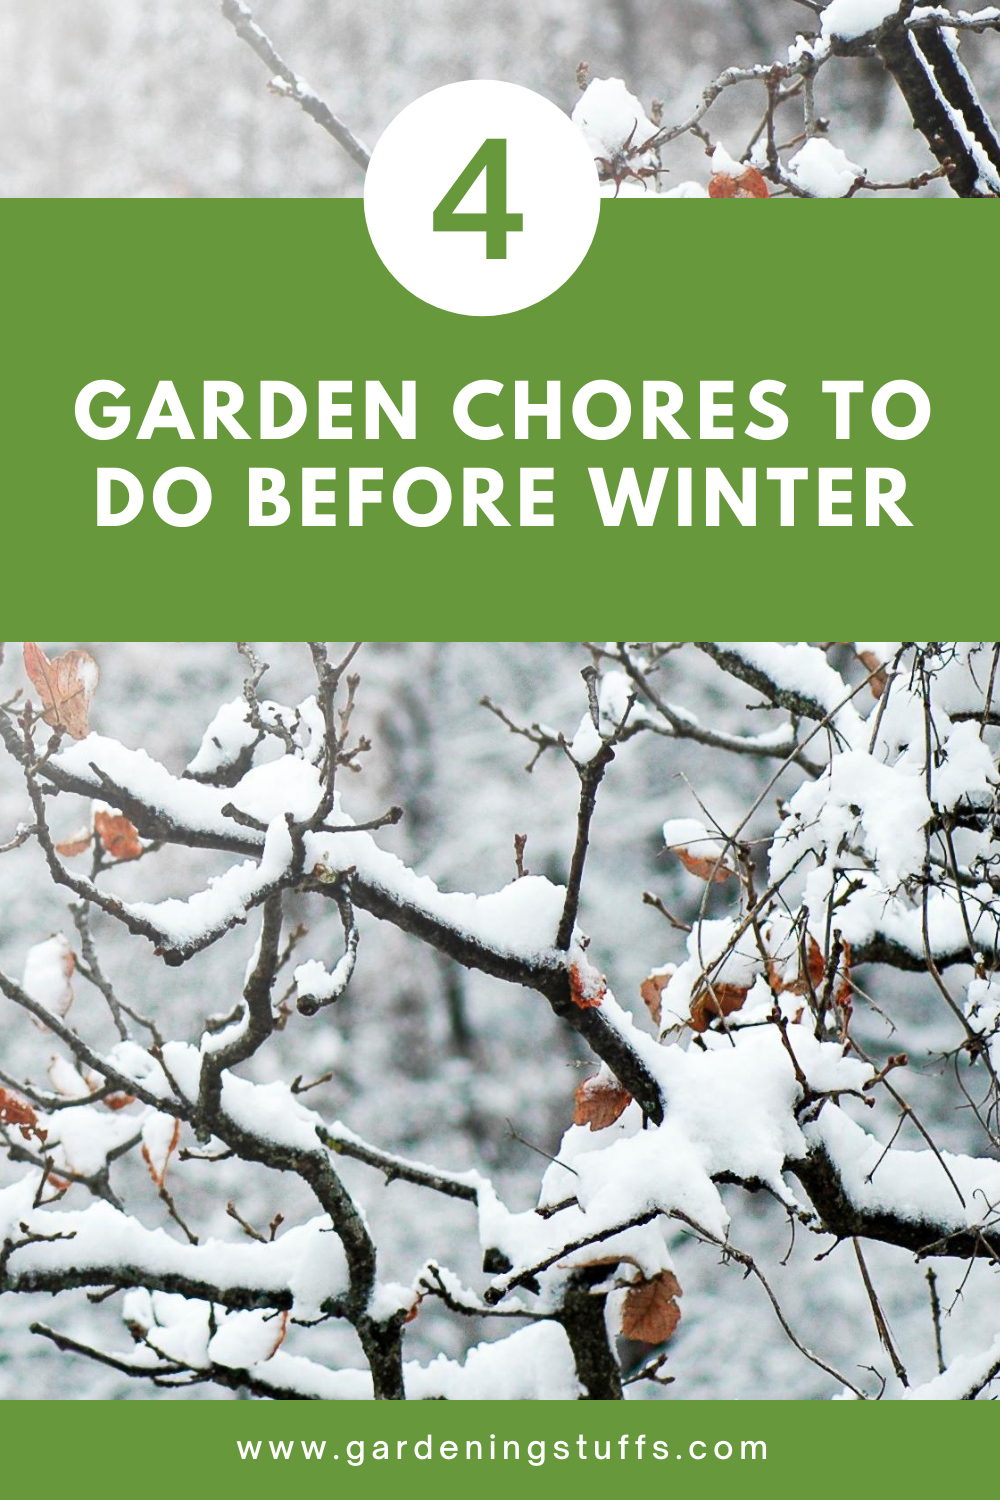 Before you pack up for your own winter cave, you have to secure your garden first. This involves preparing your tools, cleaning up your vegetable plants, weeding out, and grooming your soil.